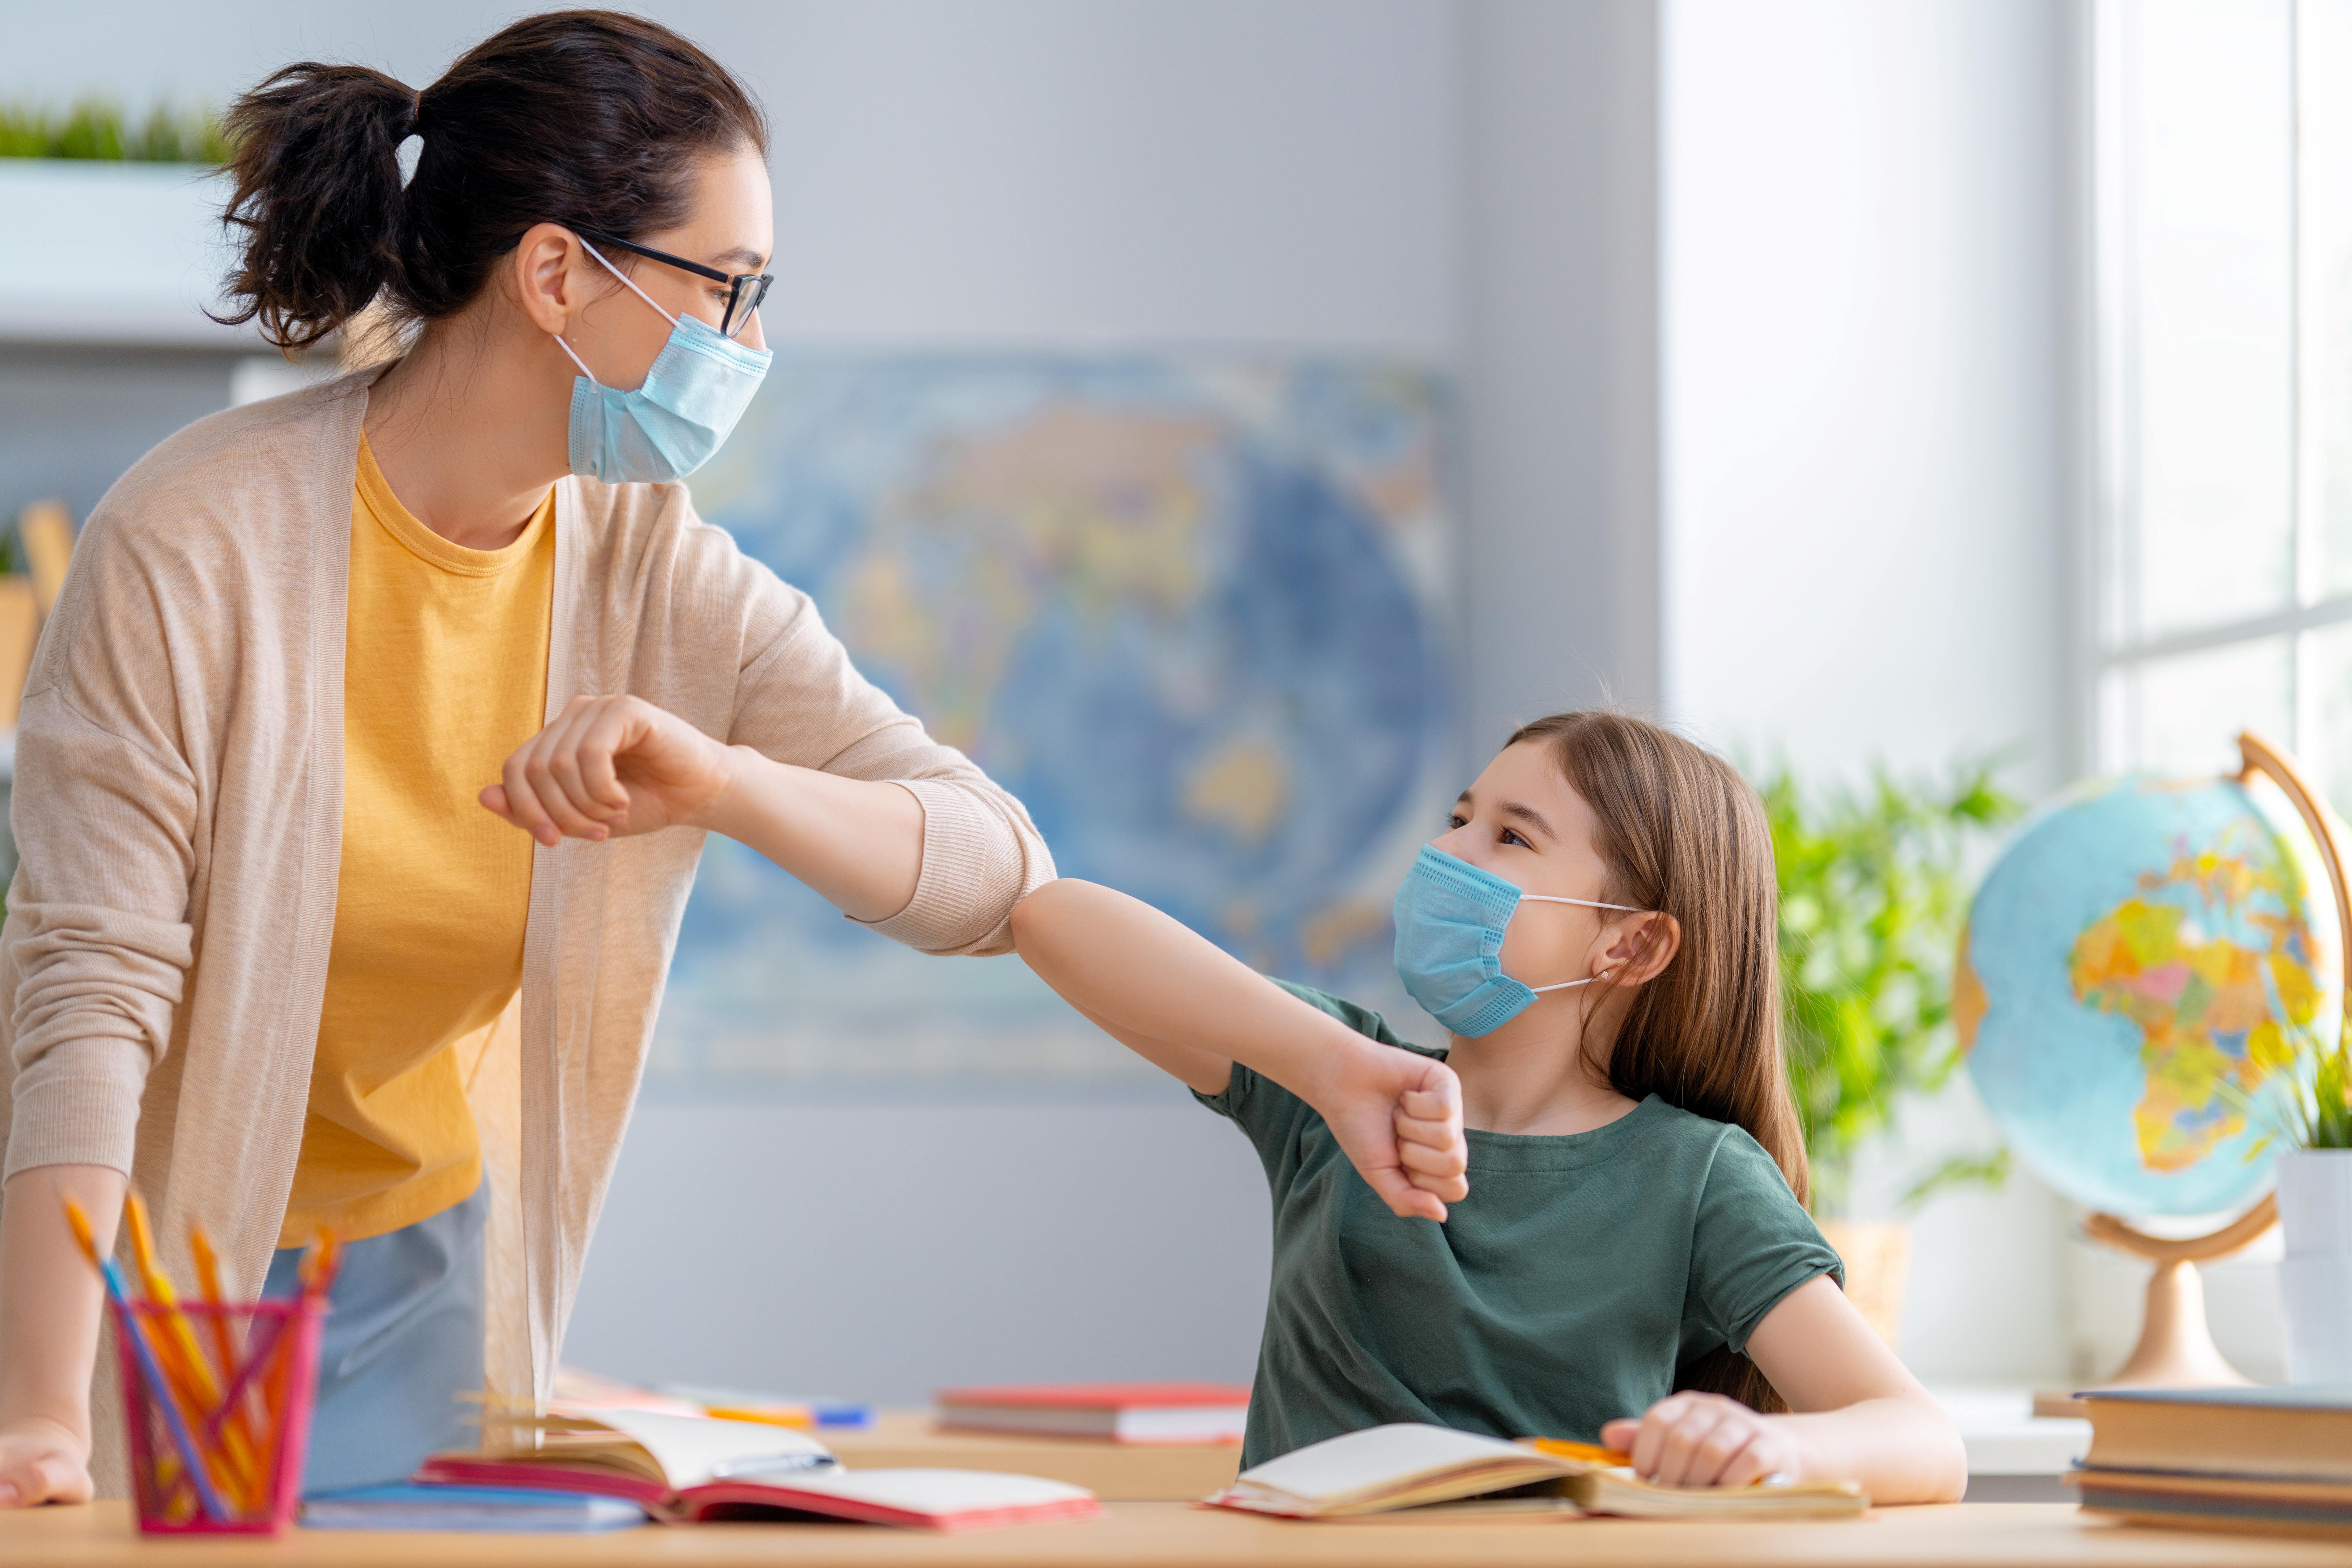 Teacher wearing a mask elbow bumping with child wearing a mask